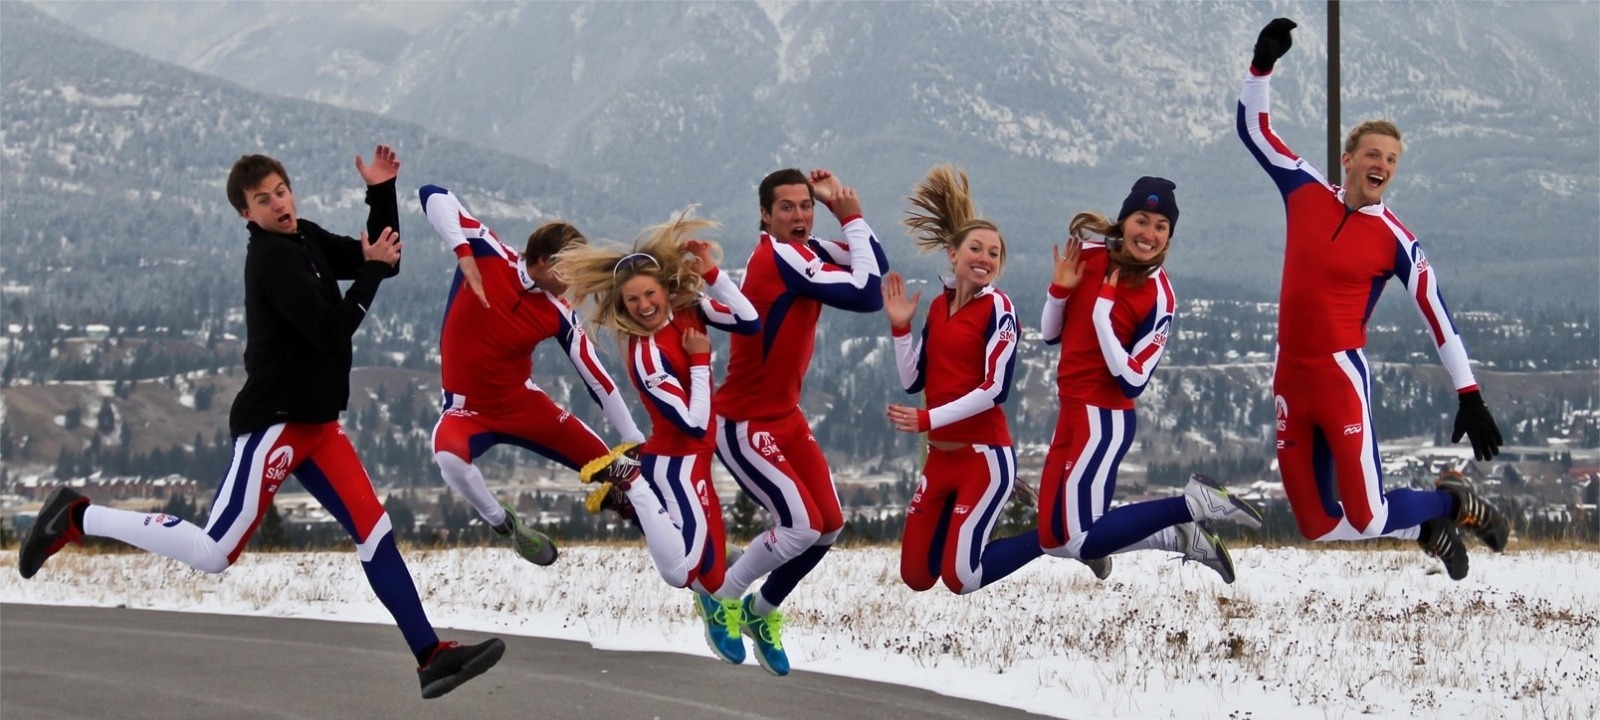 Skiers leaping in the air for for team photo